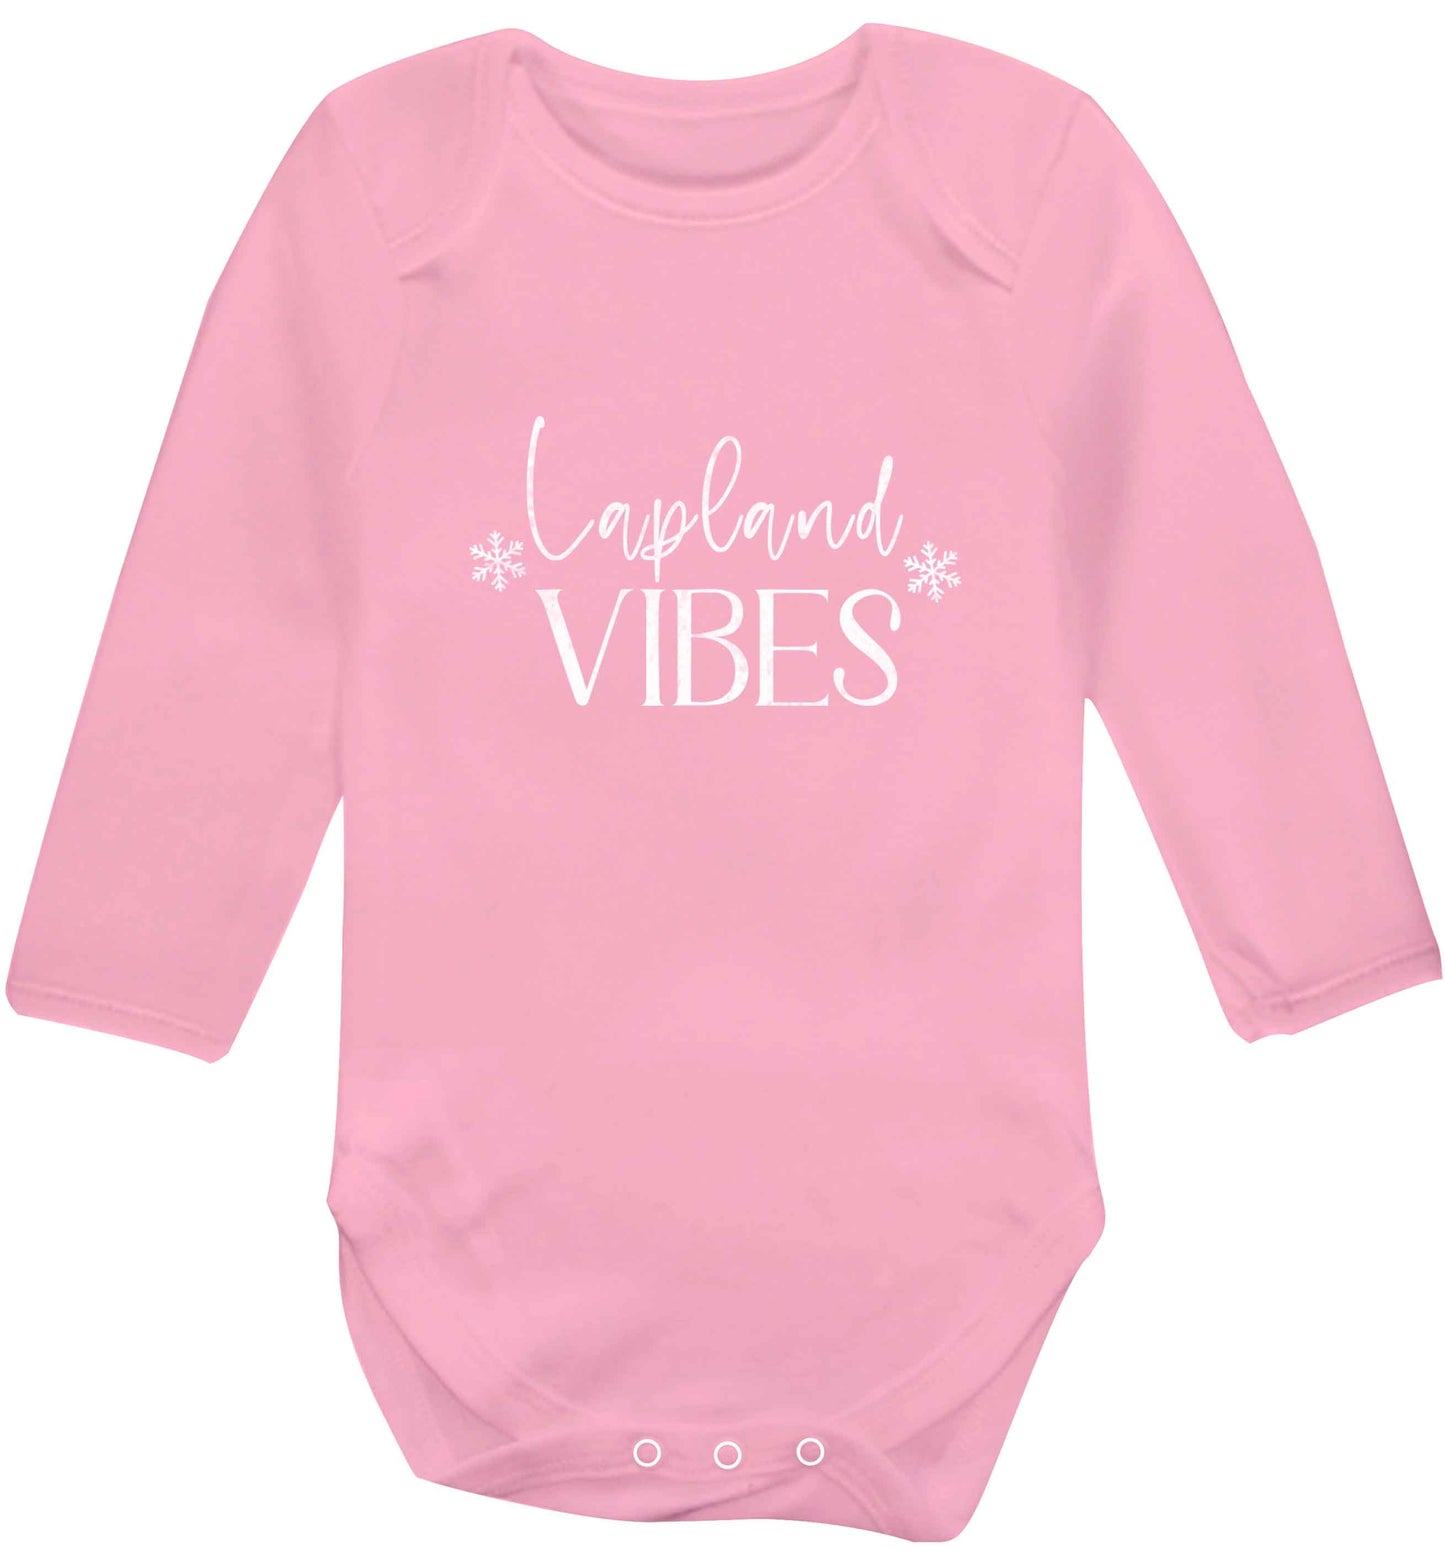 Lapland vibes baby vest long sleeved pale pink 6-12 months